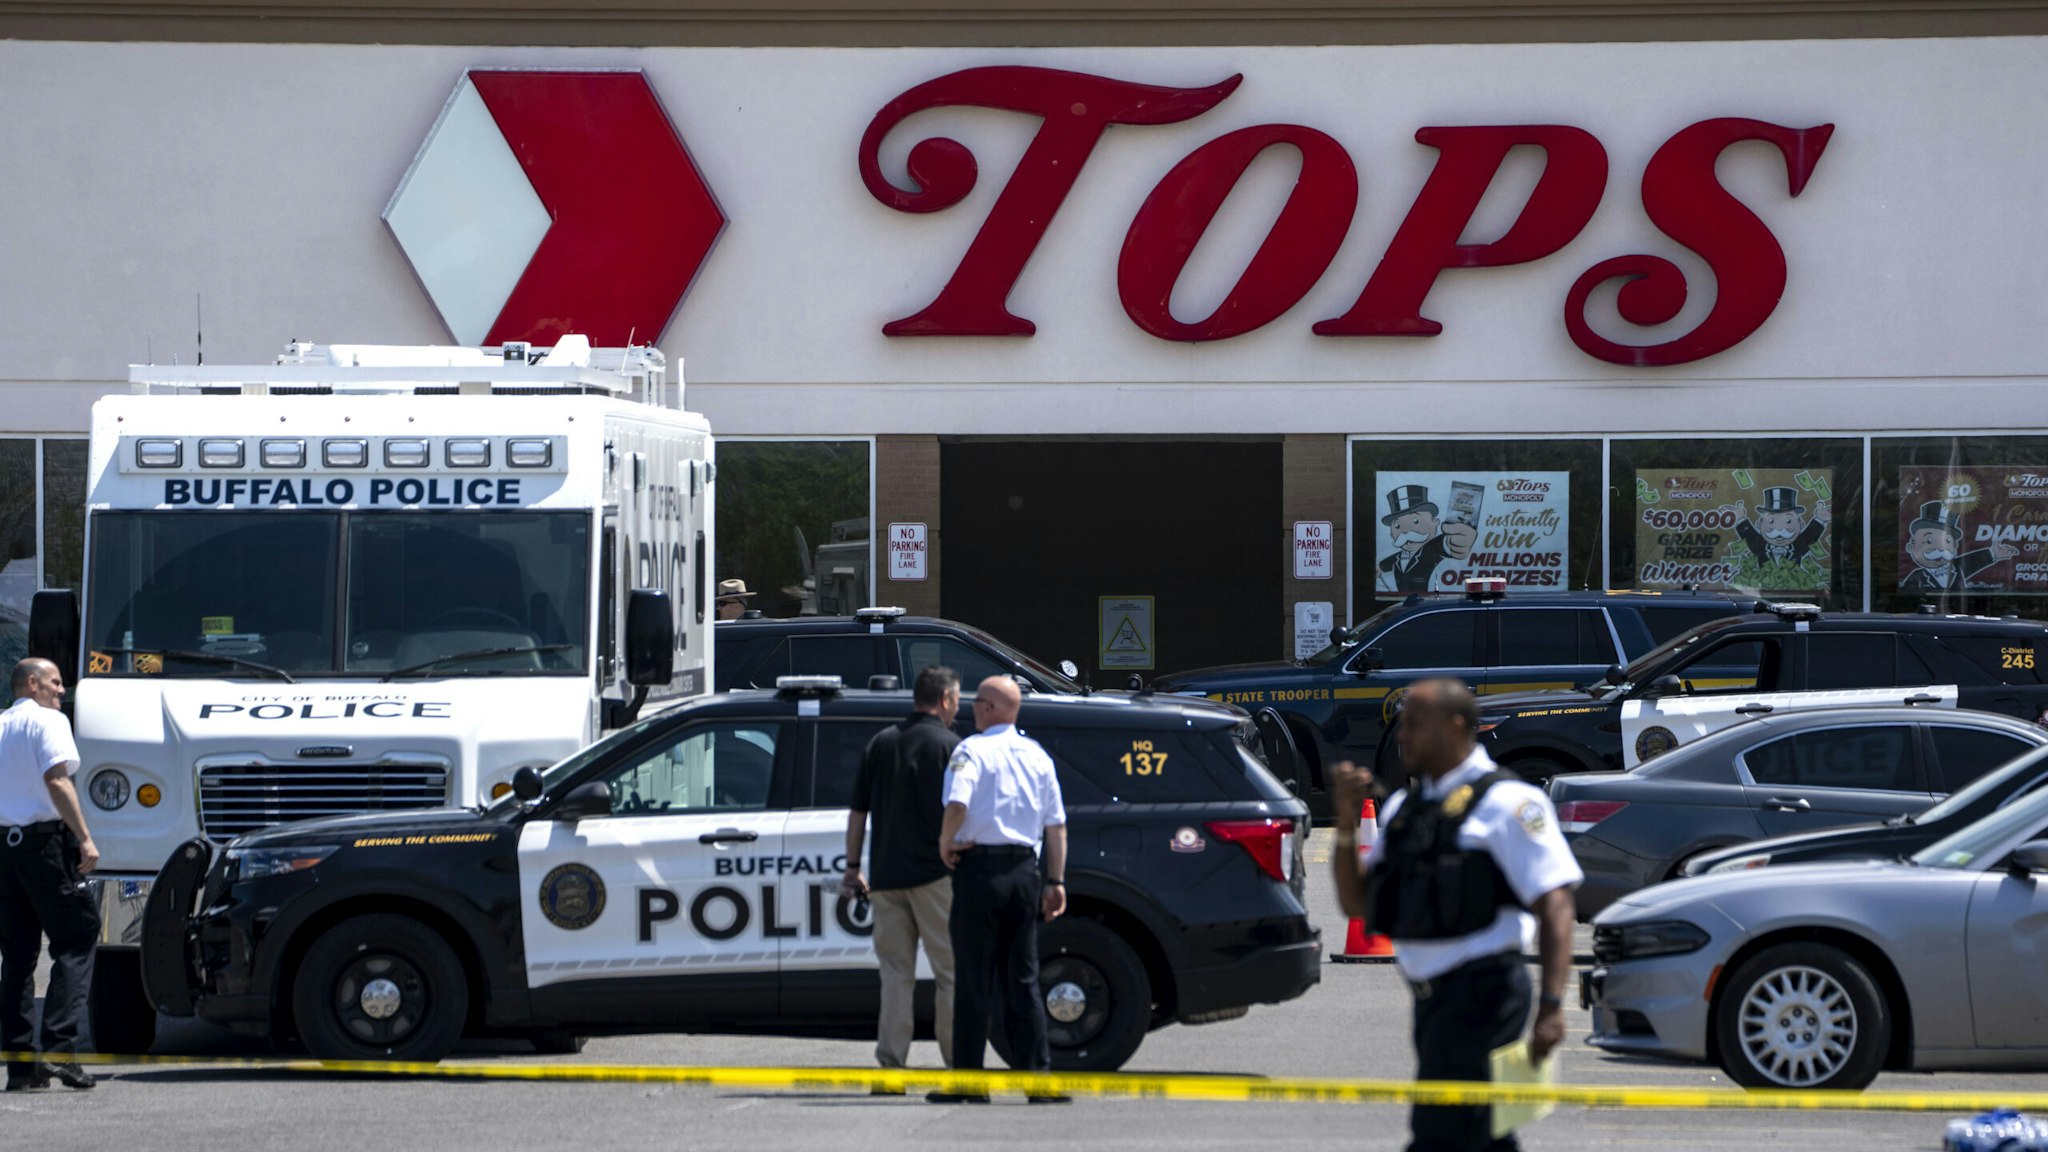 BUFFALO, NY - MAY 15: Law enforcement officials are seen at the scene of a mass shooting at Tops Friendly Market at Jefferson Avenue and Riley Street on Sunday, May 15, 2022 in Buffalo, NY. The fatal shooting of 10 people at a grocery store in a historically Black neighborhood of Buffalo by a young white gunman is being investigated as a hate crime and an act of racially motivated violent extremism, according to federal officials.